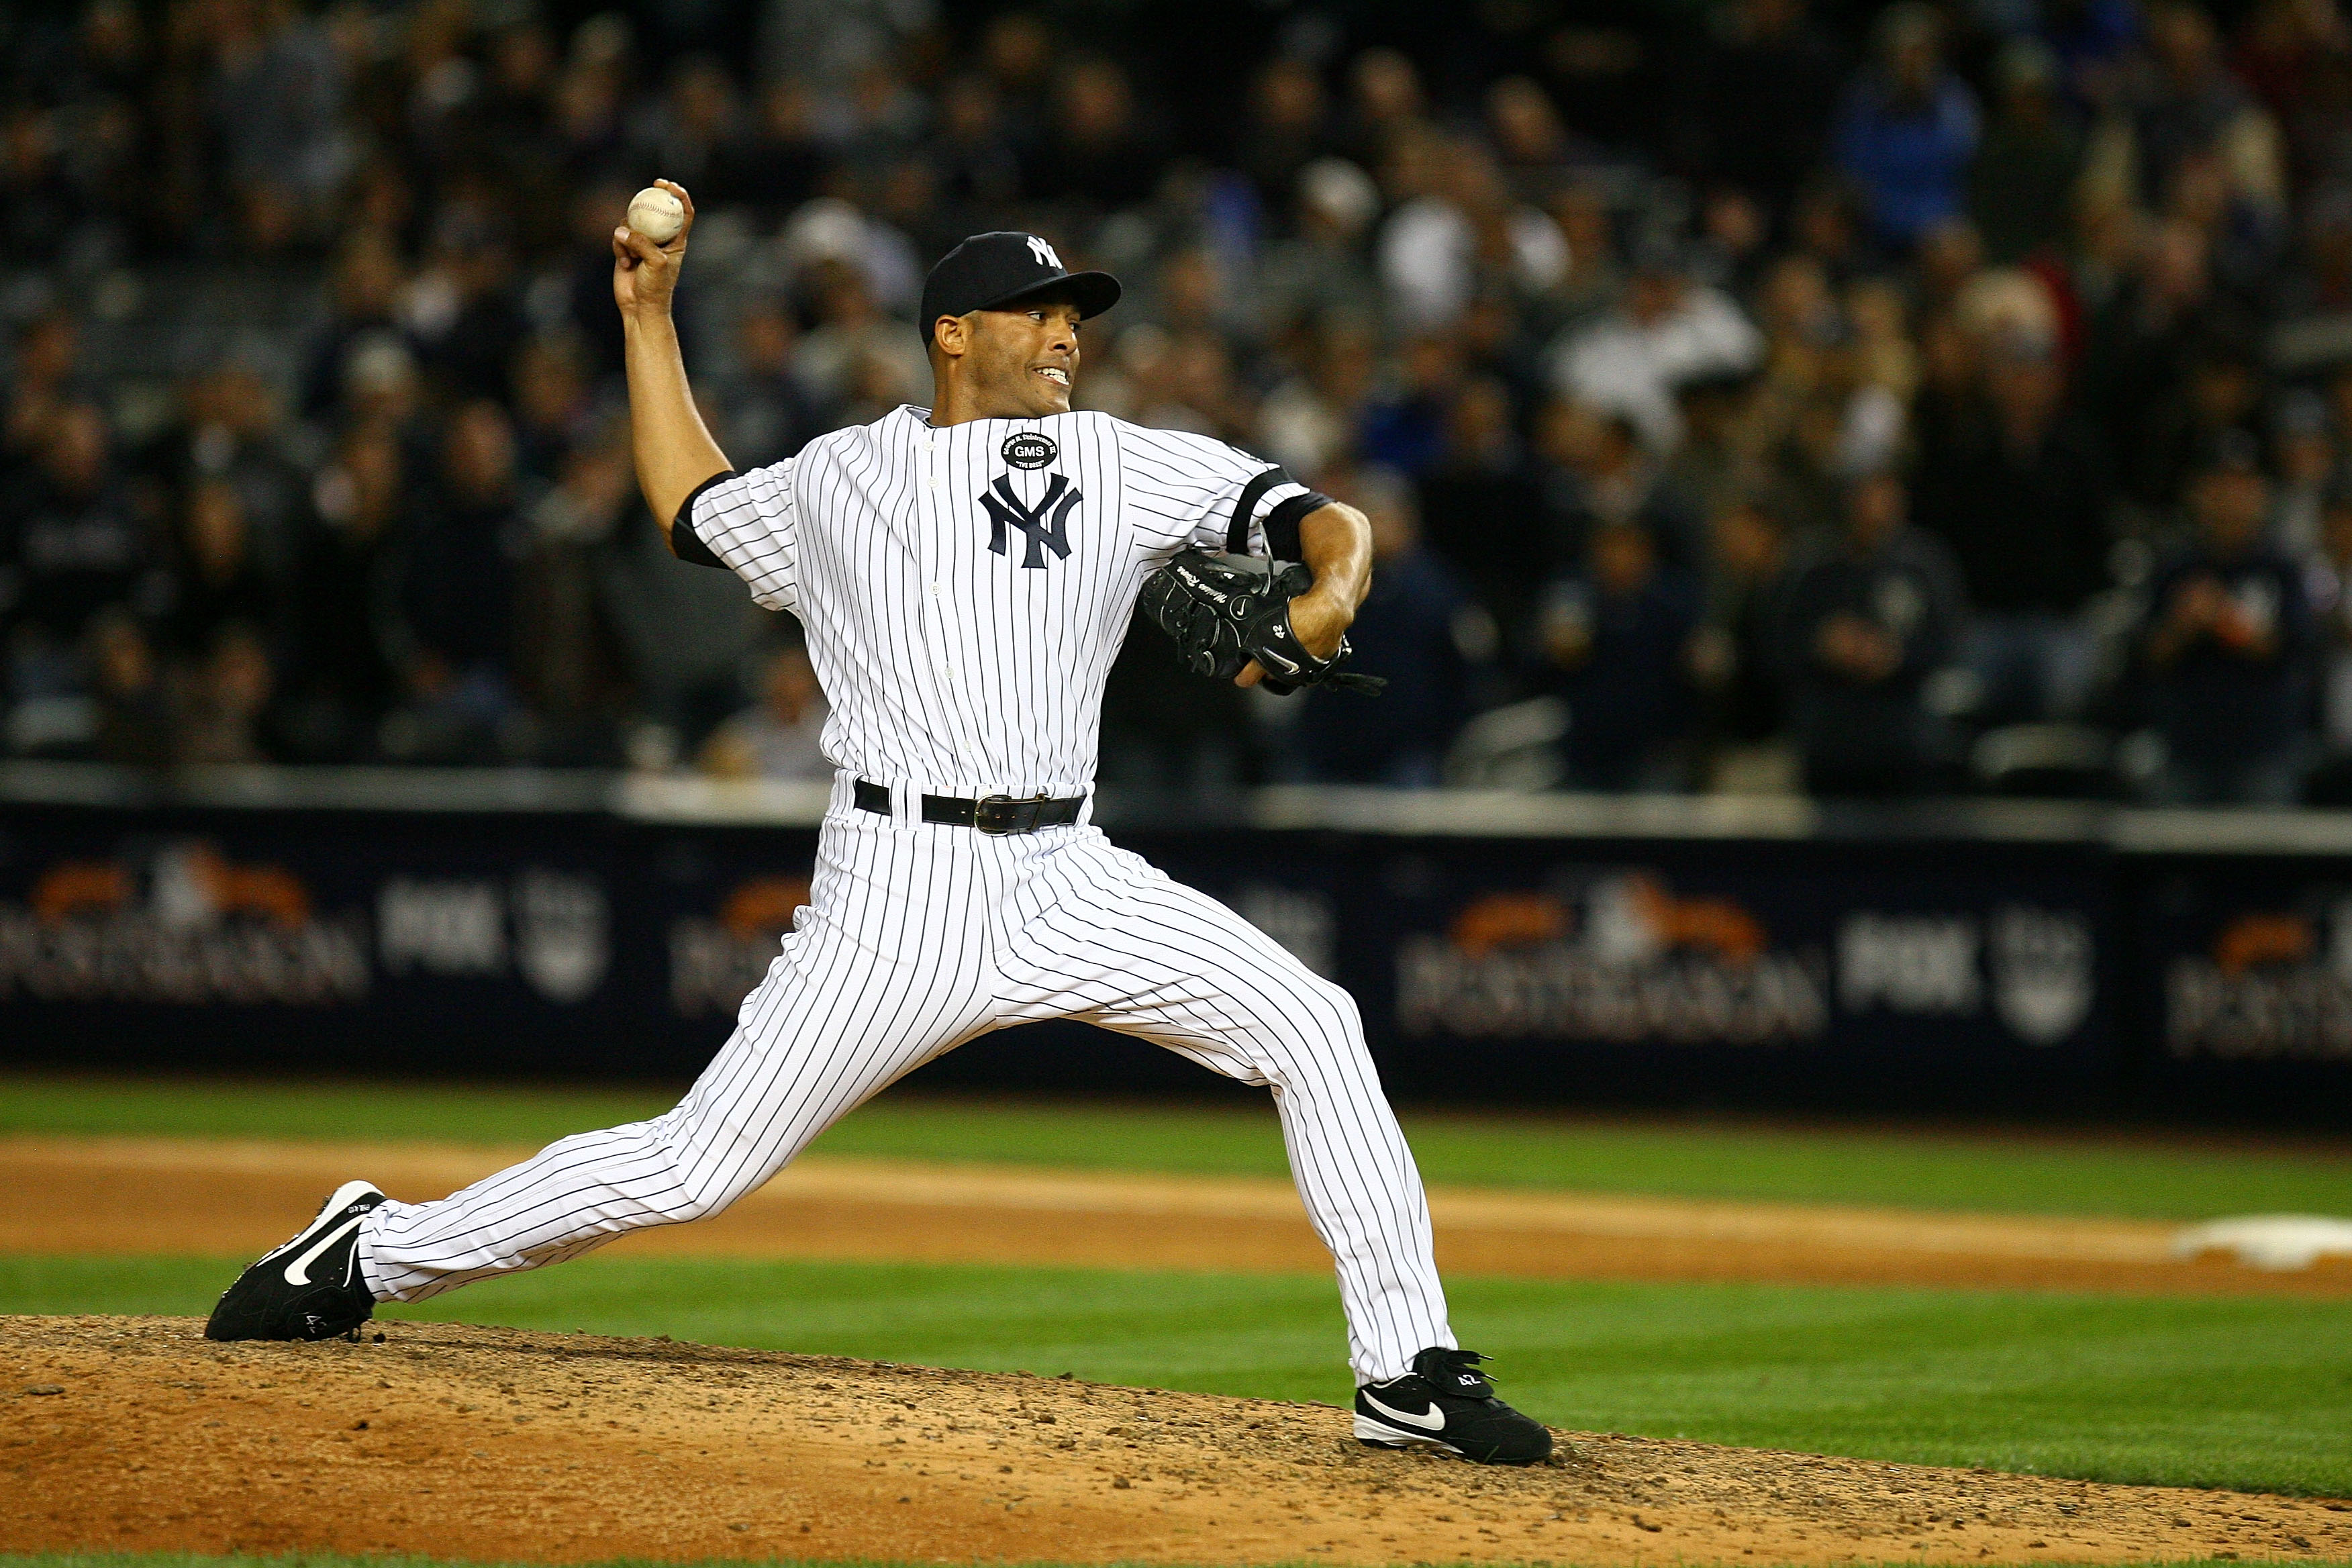 Mariano Rivera's Cutter and the Nastiest Pitches in Baseball